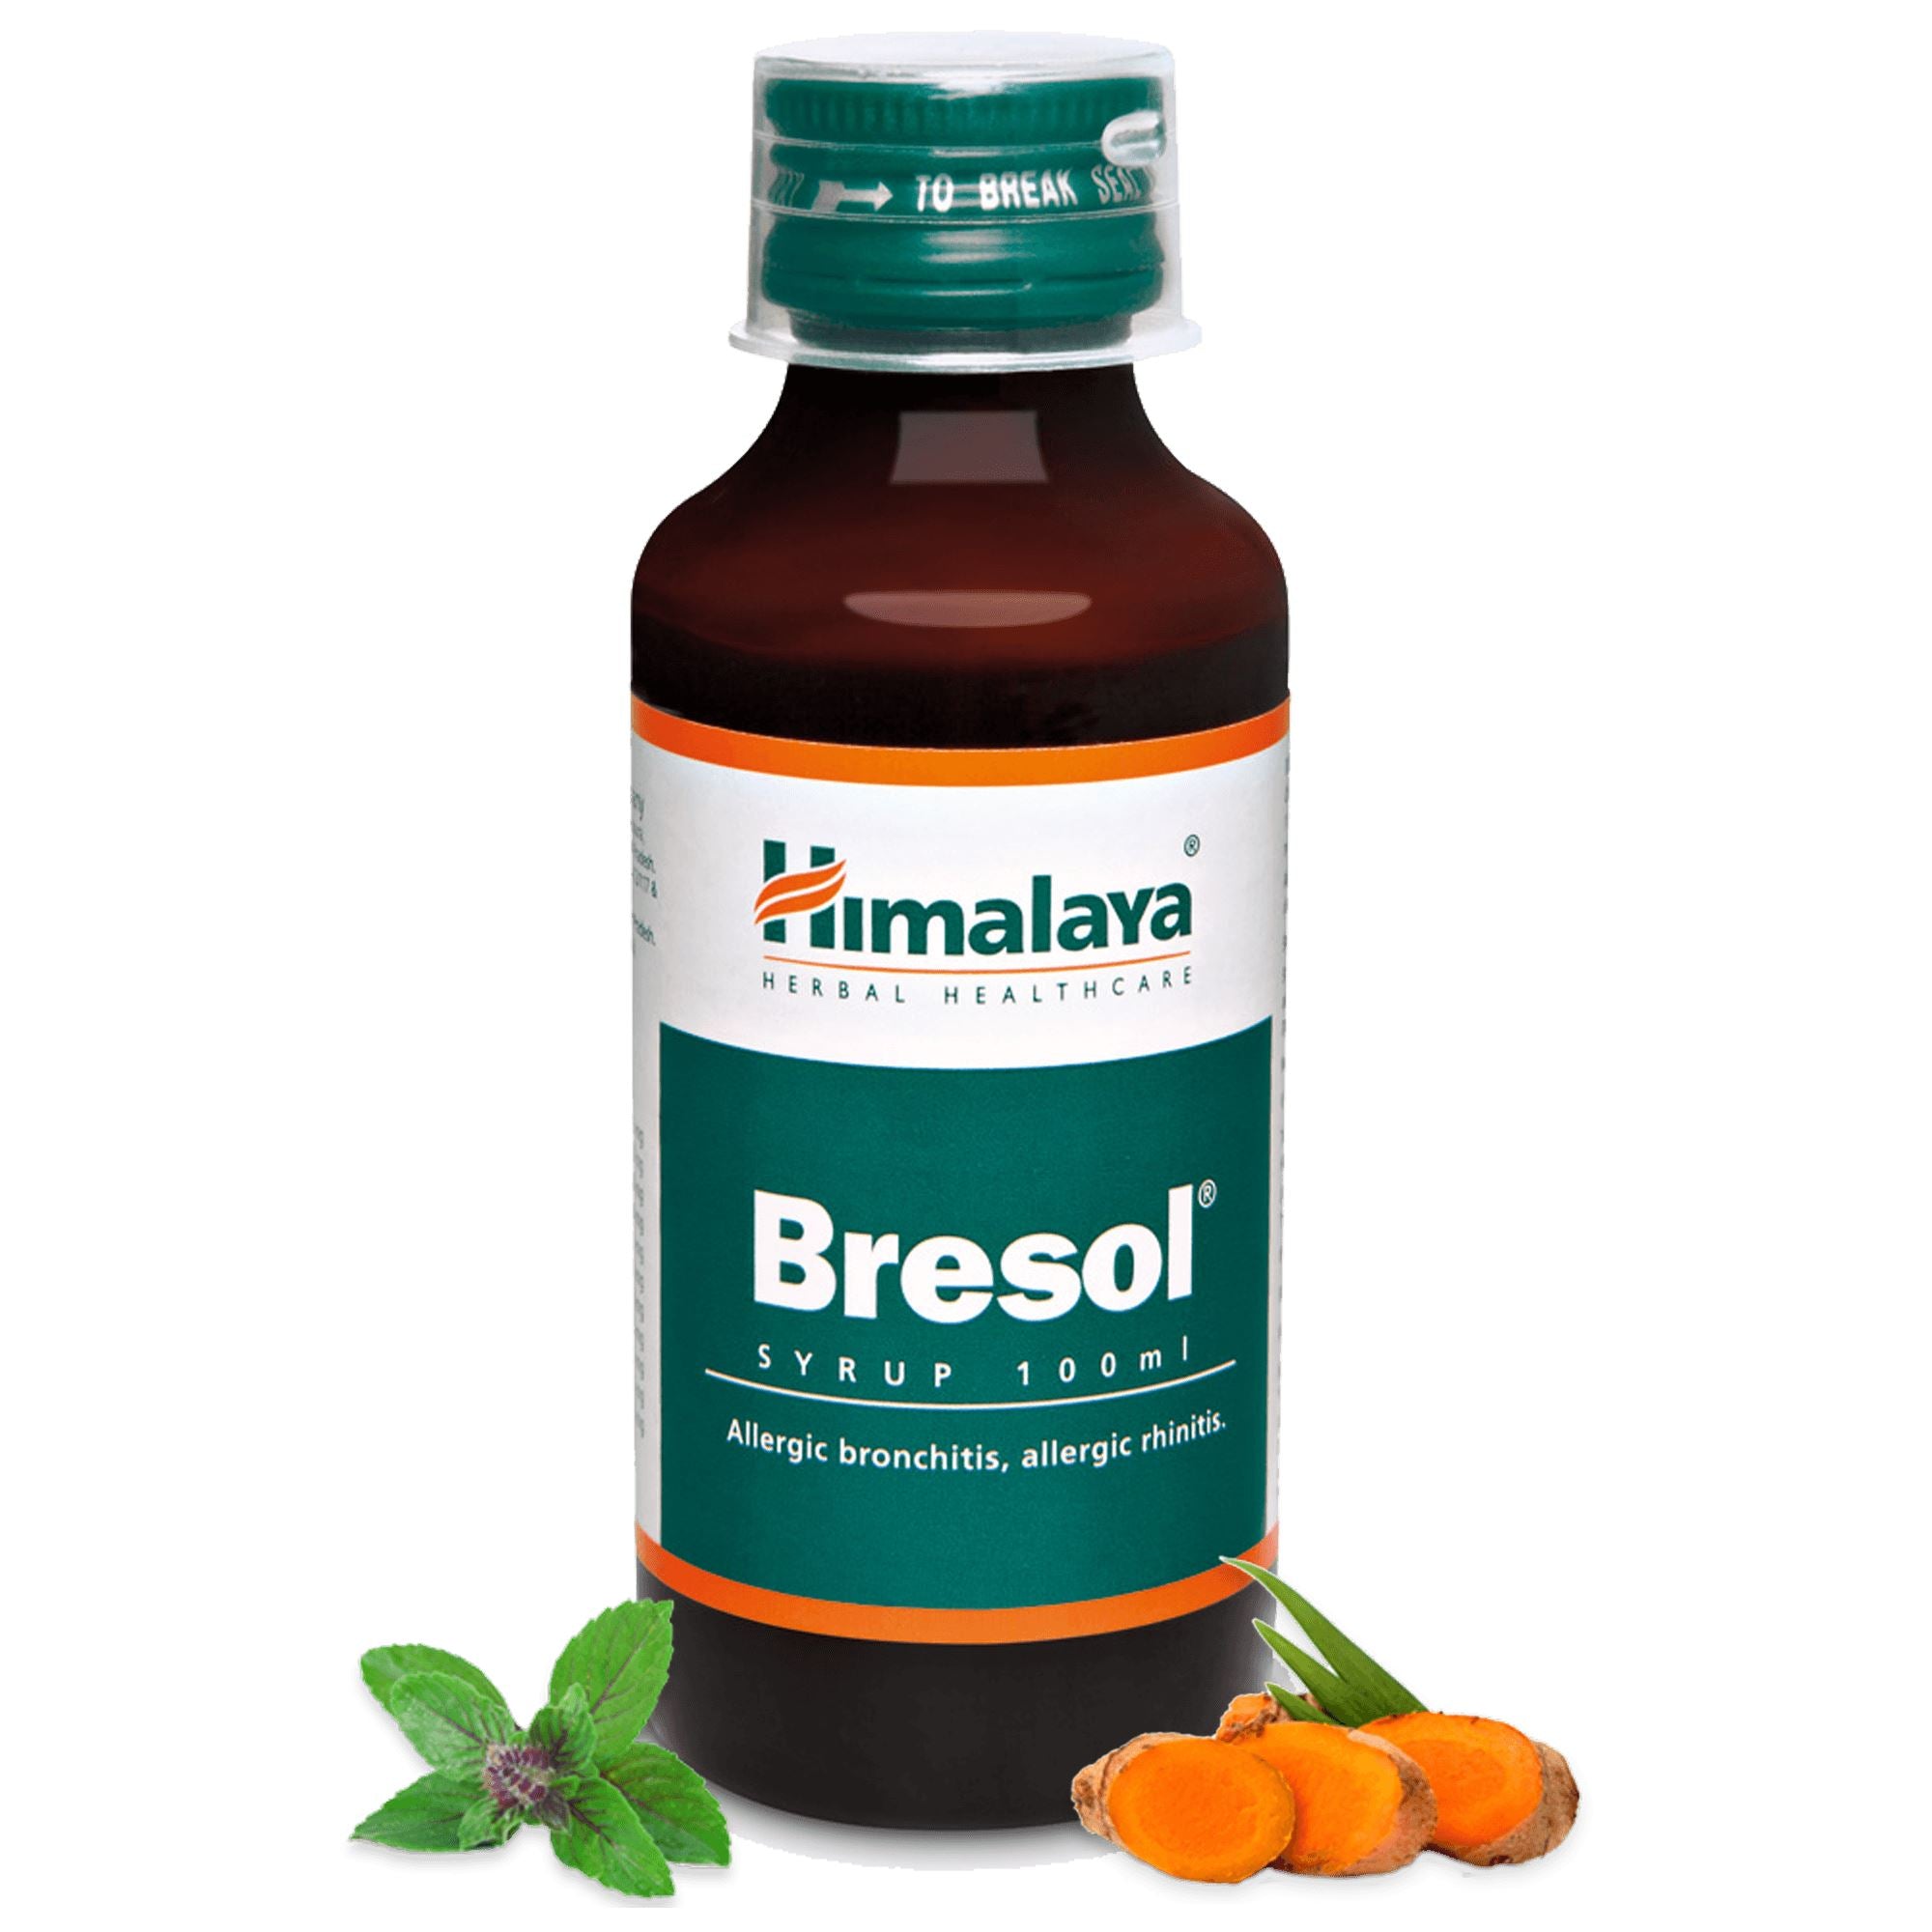 Himalaya Bresol Syrup 100ml - Syrup to fight respiratory diseases